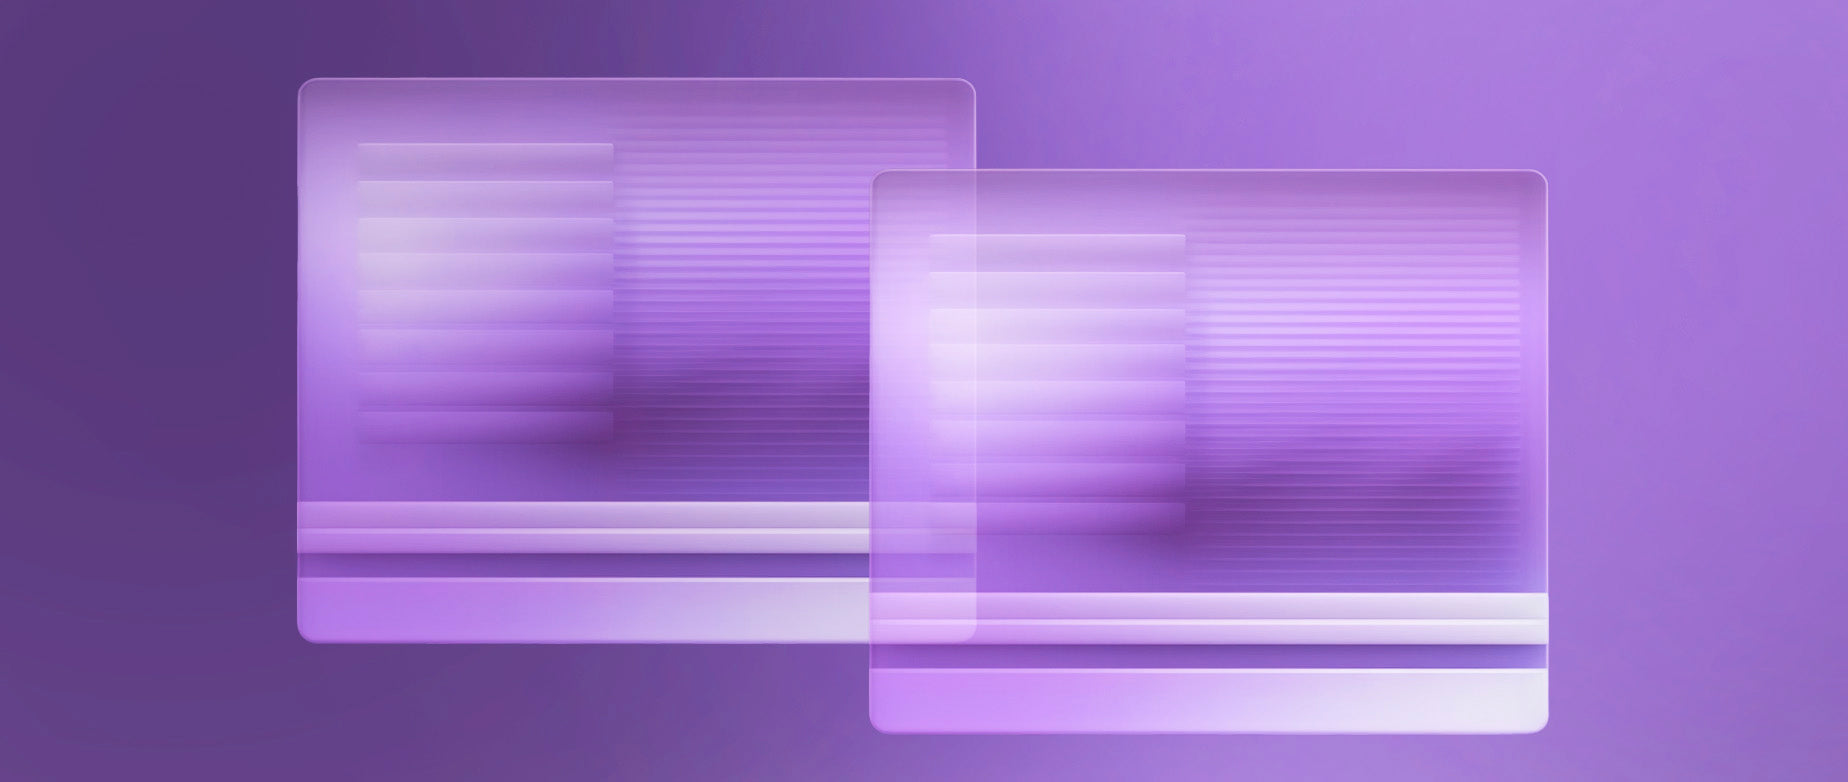 digital art showcasing two transparent purple computer screens against a purple background: content syndication